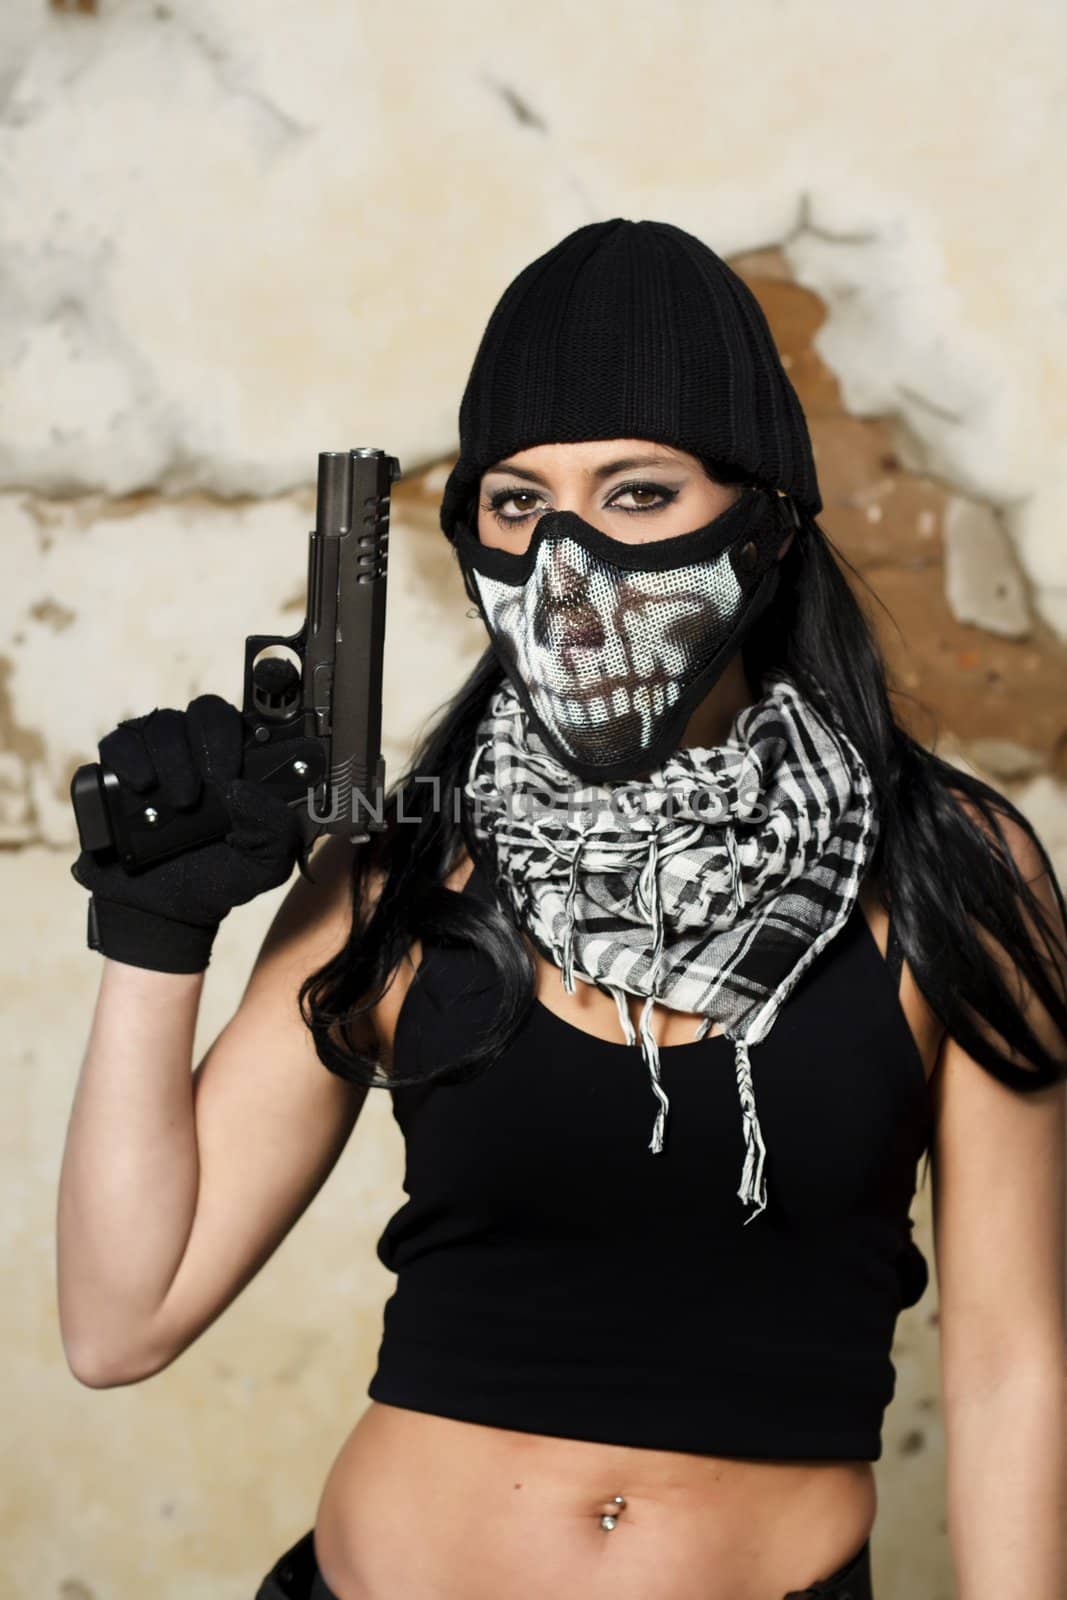 View of a beautiful action girl holding a weapon and mask, in a outdoor location.